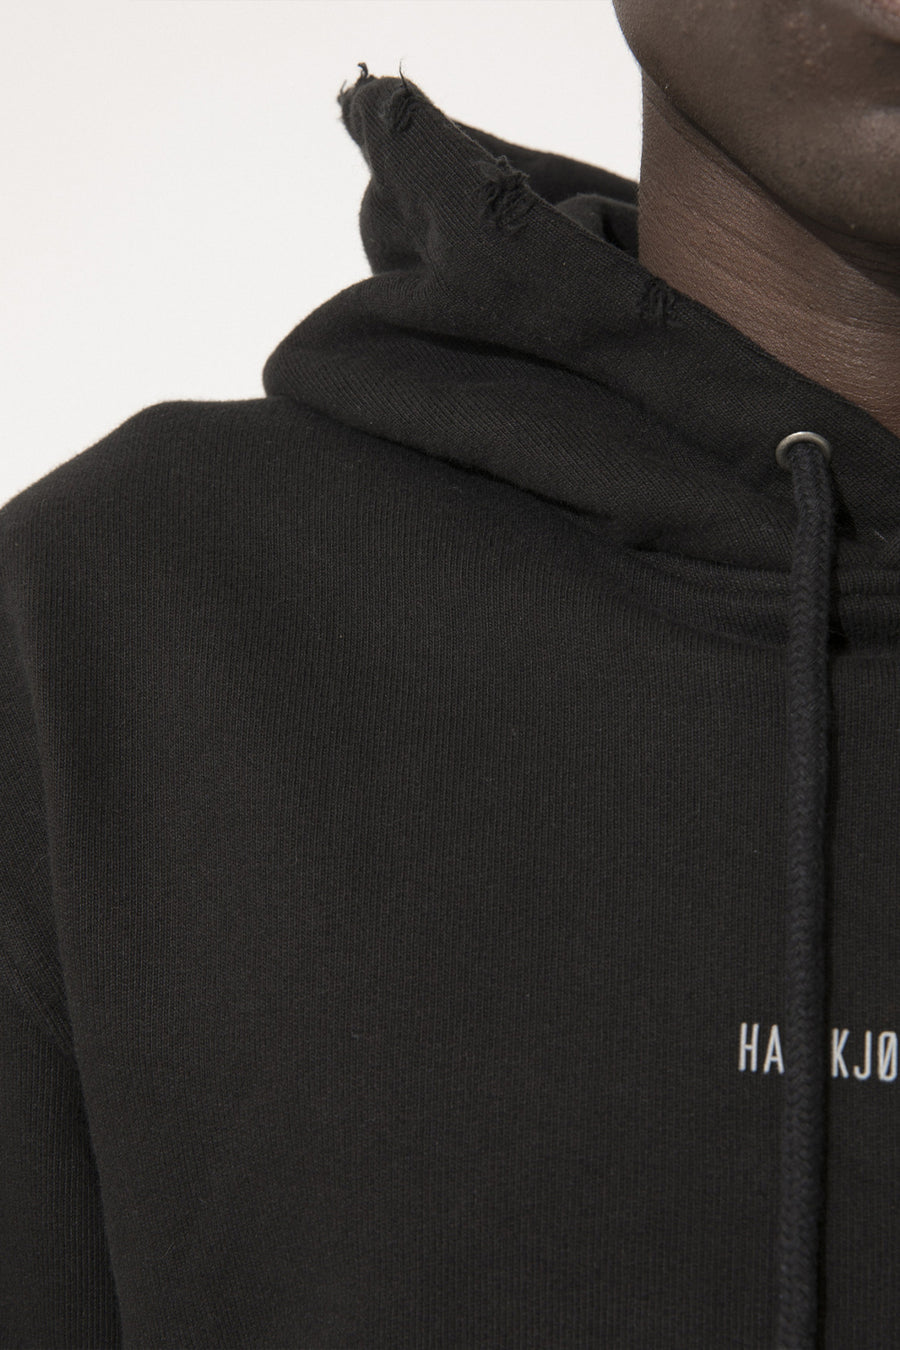 Buy the Han Kjobenhavn Distressed Logo Hoodie in Black at Intro. Spend £50 for free UK delivery. Official stockists. We ship worldwide.